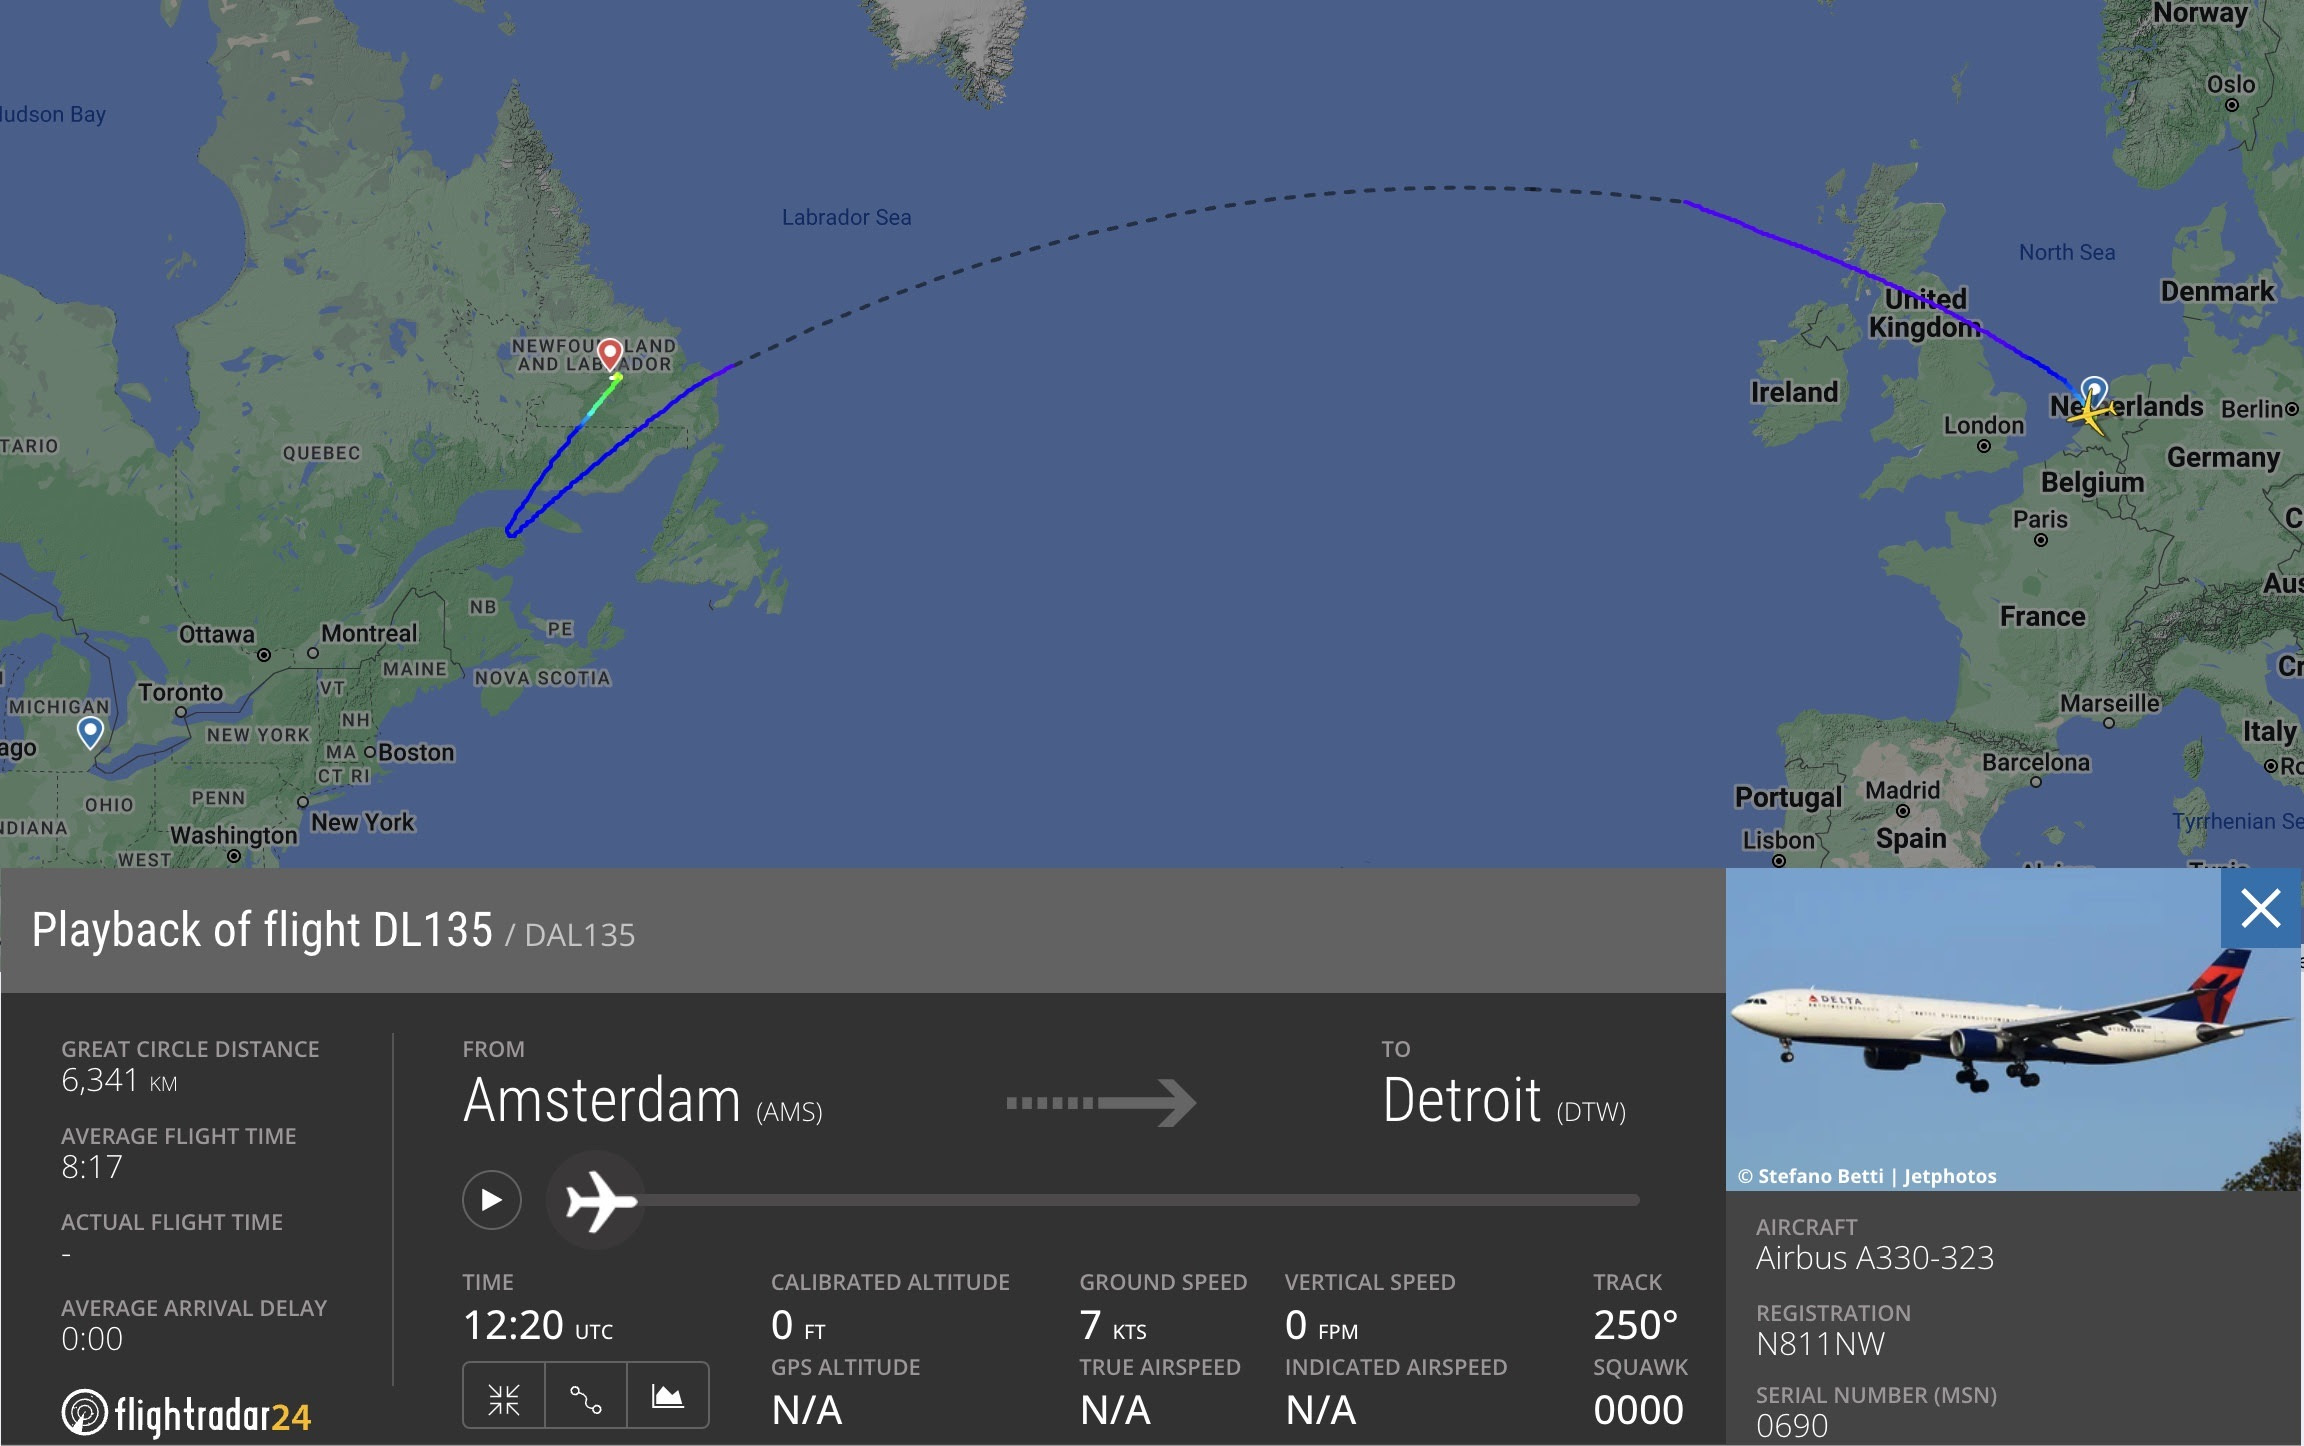 DL135 flight path from Amsterdam to Detroit with a diversion to Goose Bay